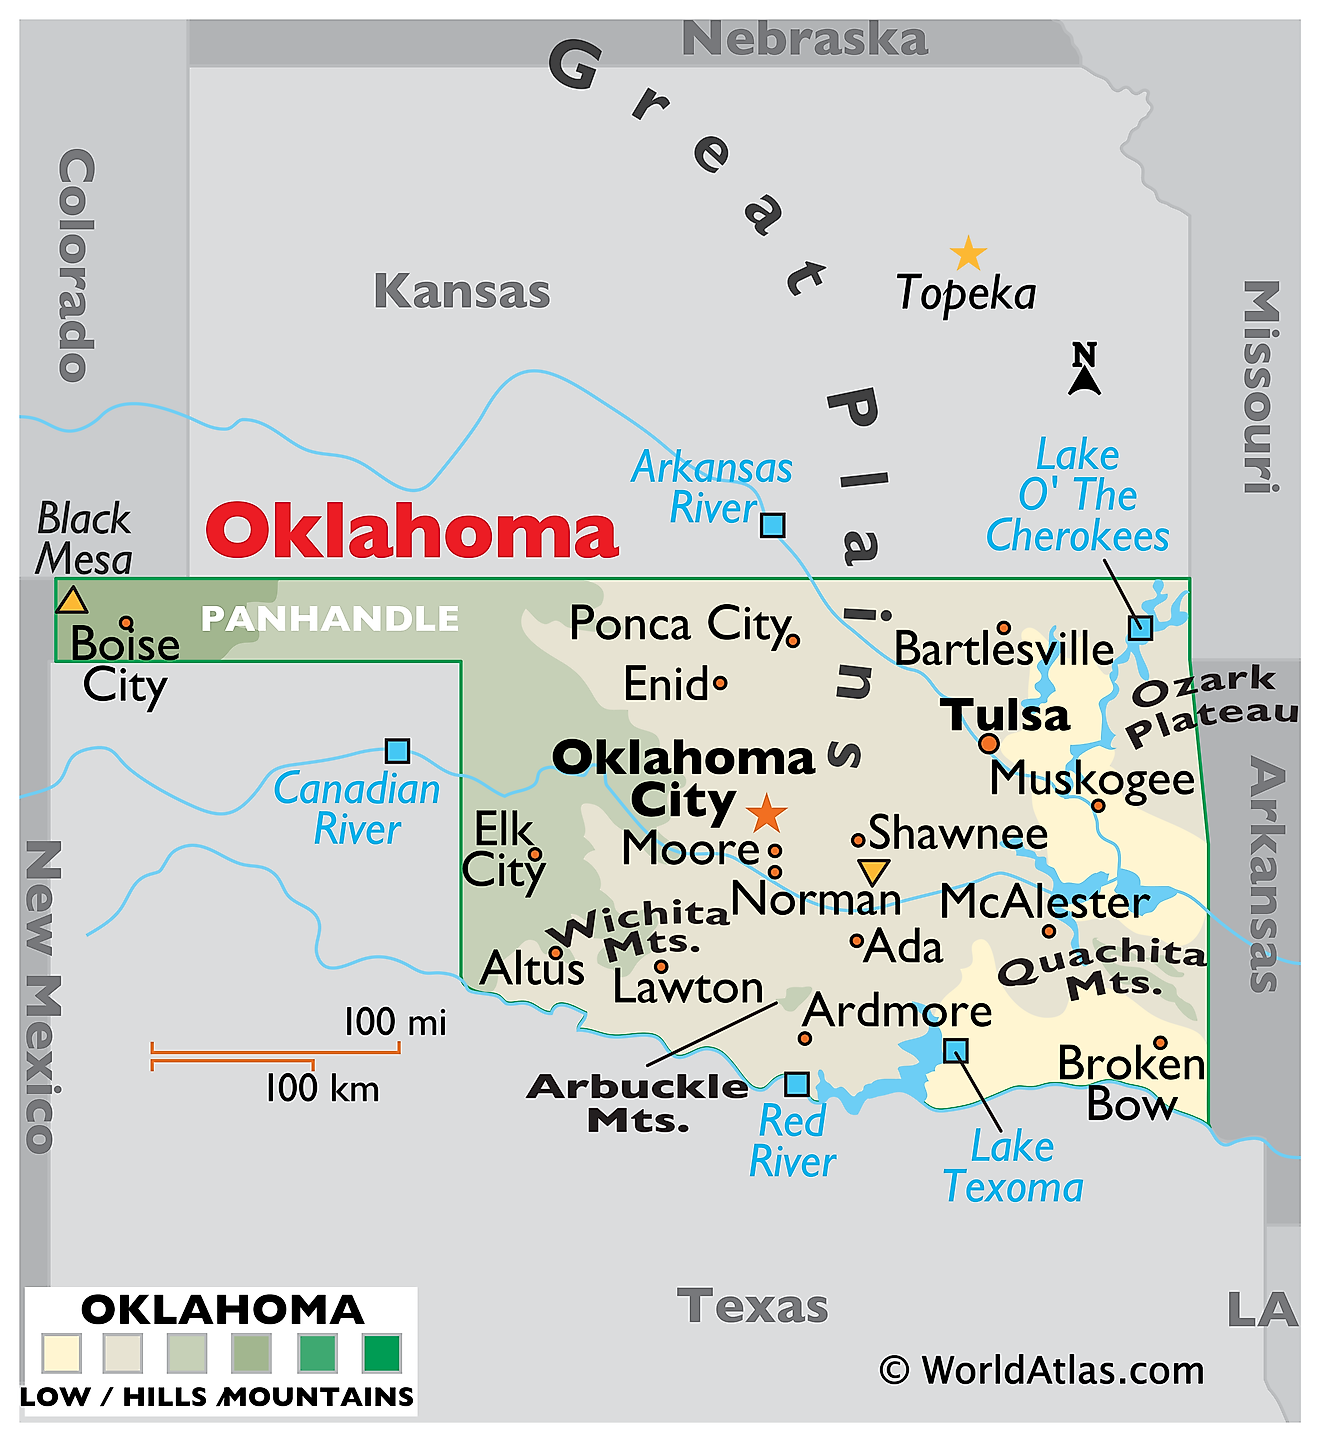 Physical Map of Oklahoma. It shows the physical features of Oklahoma including mountain ranges, major rivers and lakes.